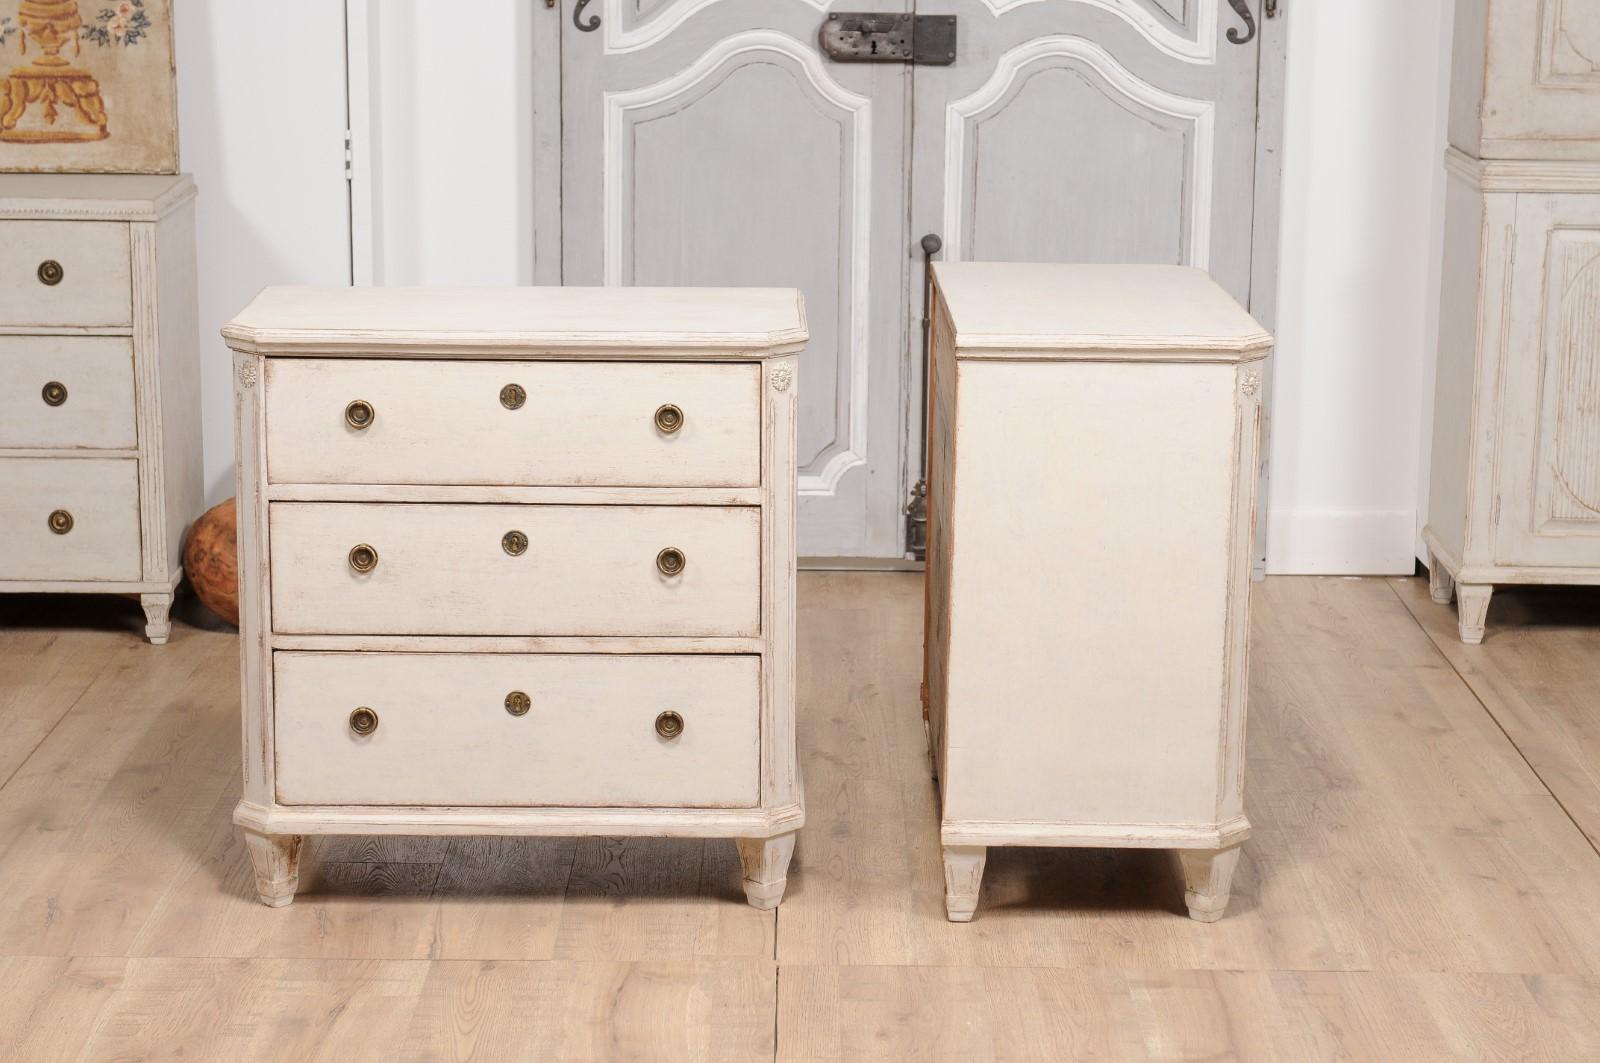 19th Century Swedish Gustavian Style Painted Three-Drawer Chests, a Pair For Sale 3